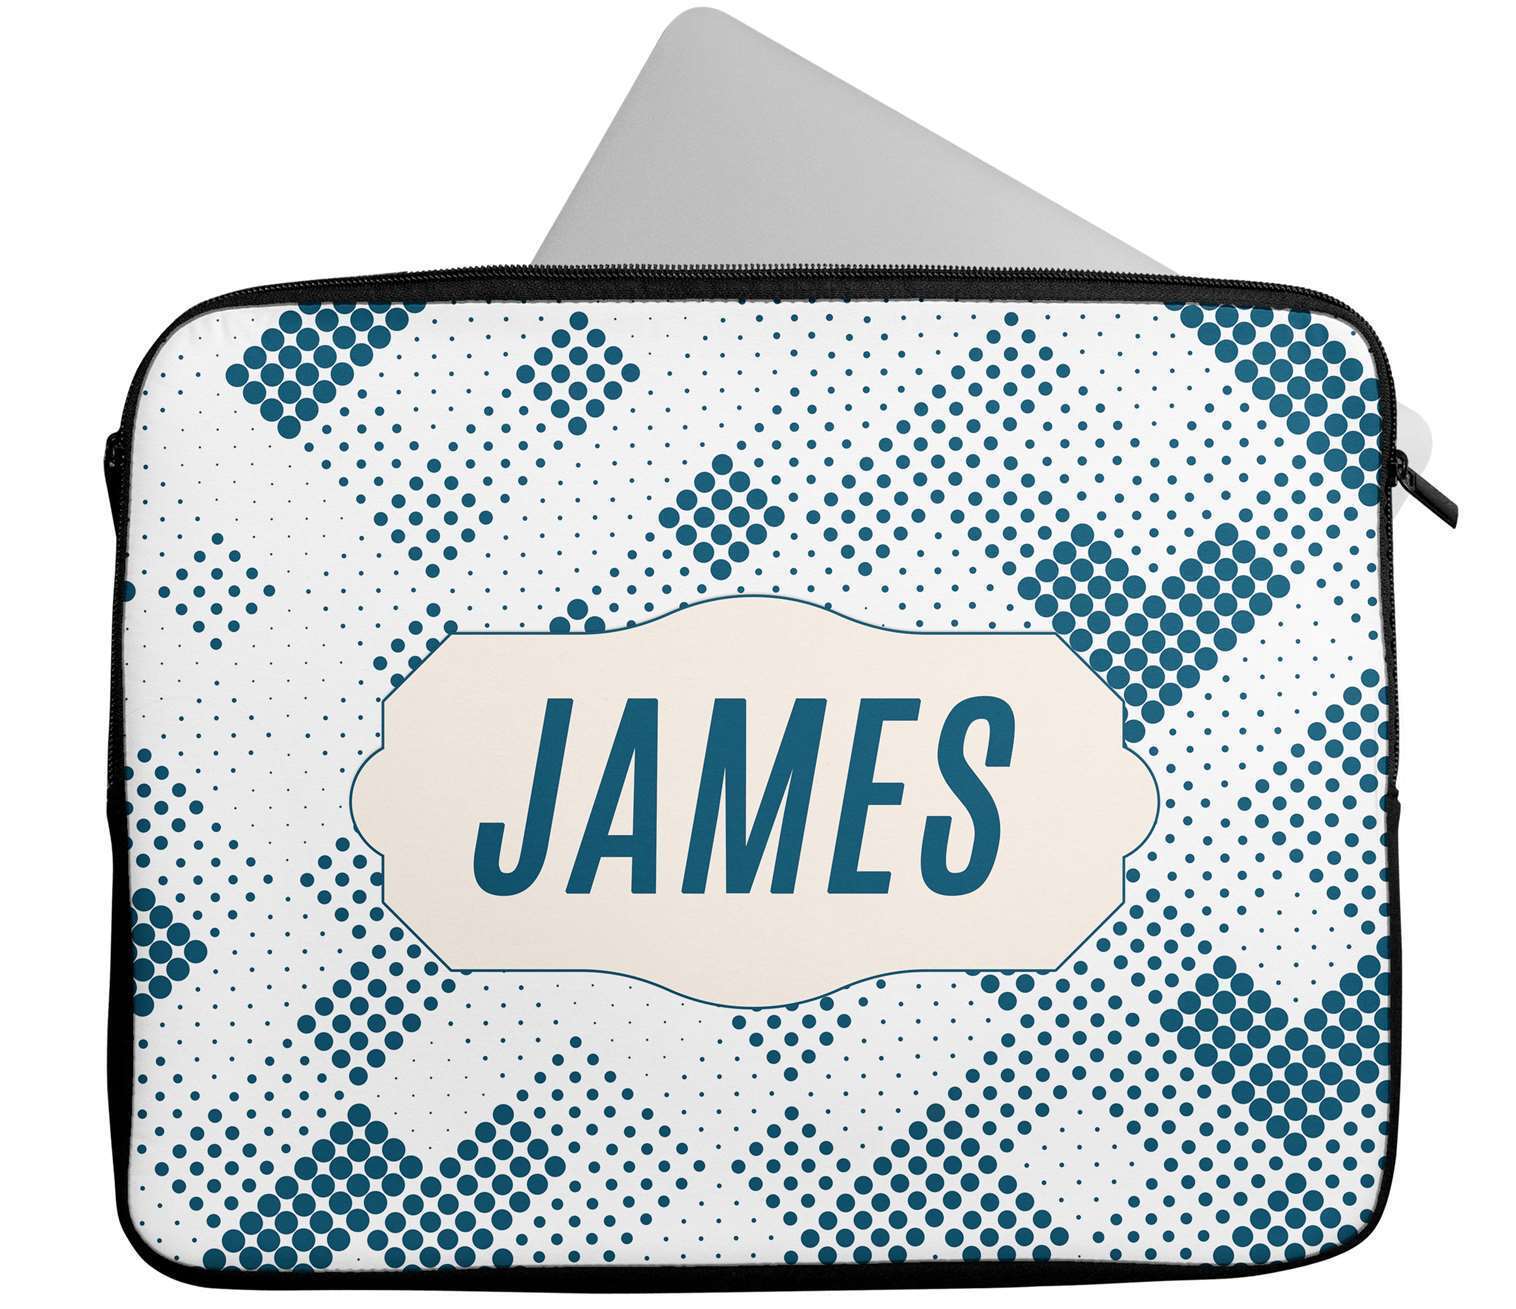 Personalised Any Name Patterned Design Laptop Case Sleeve Tablet Bag 26